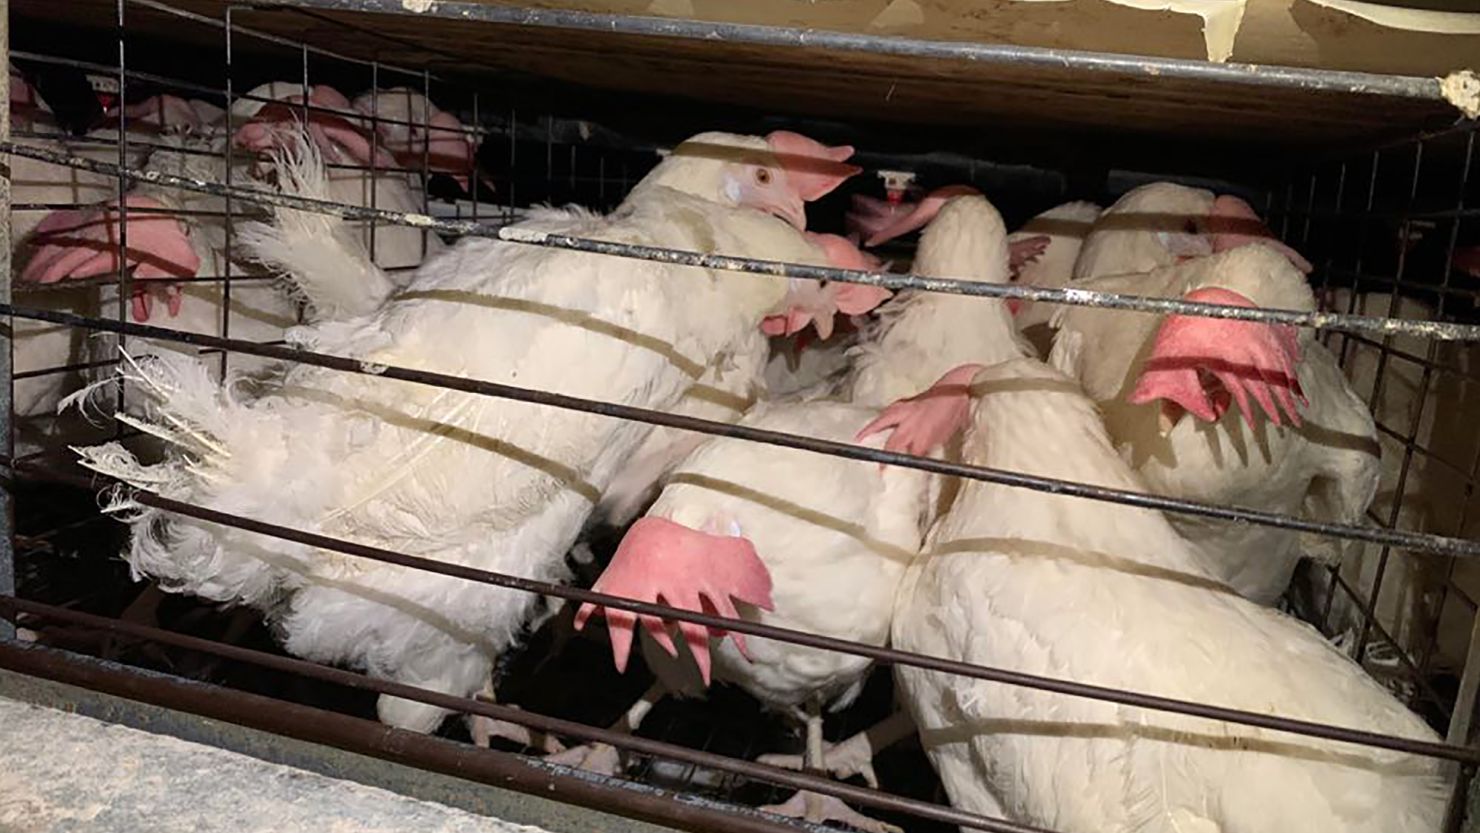 One thousand hens were rescued by an animal sanctuary from an Iowa egg farm.